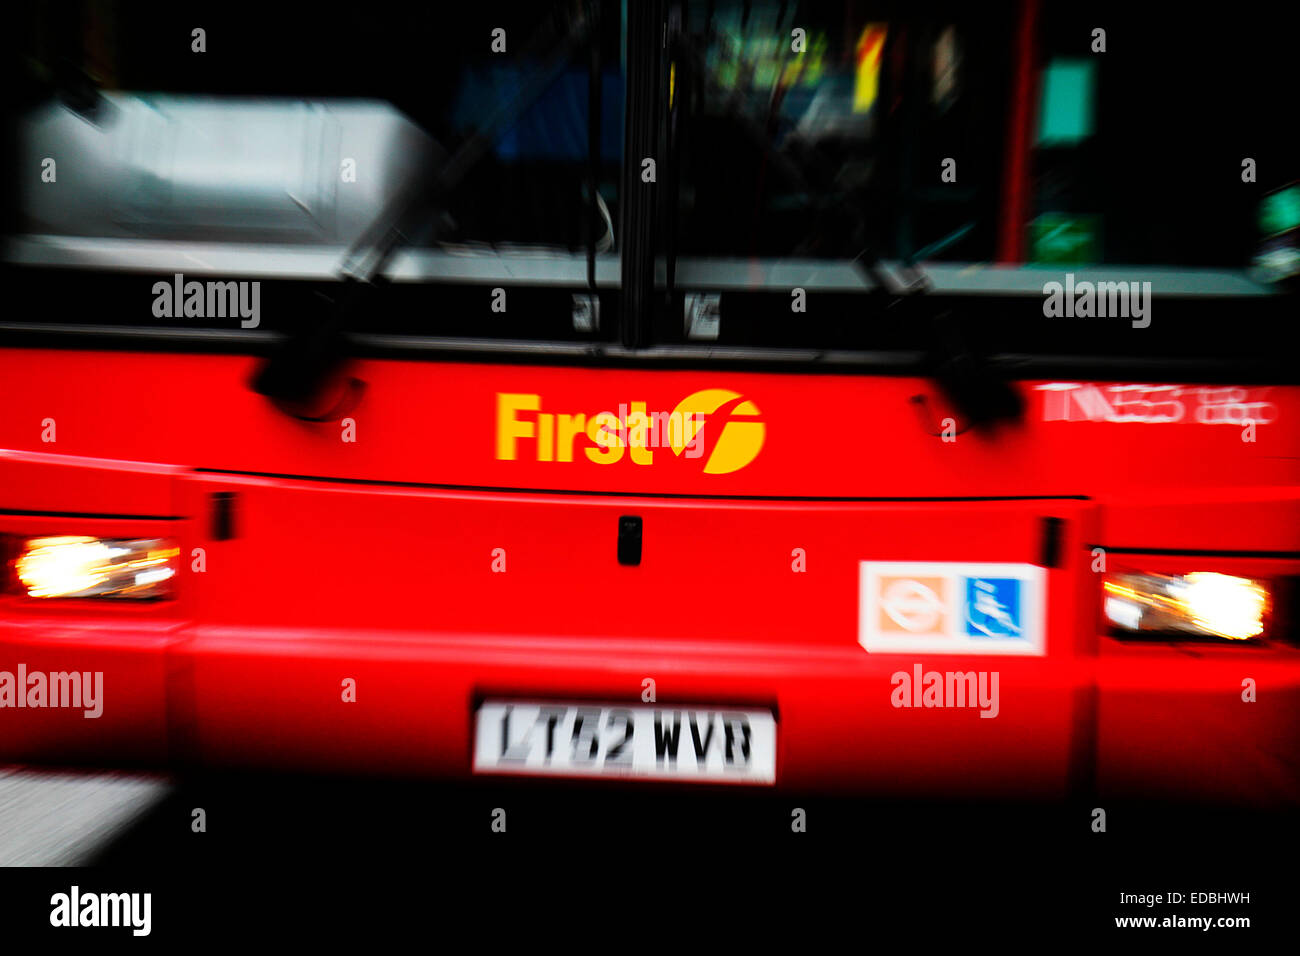 First group bus at Liverpool Street station, London. Stock Photo